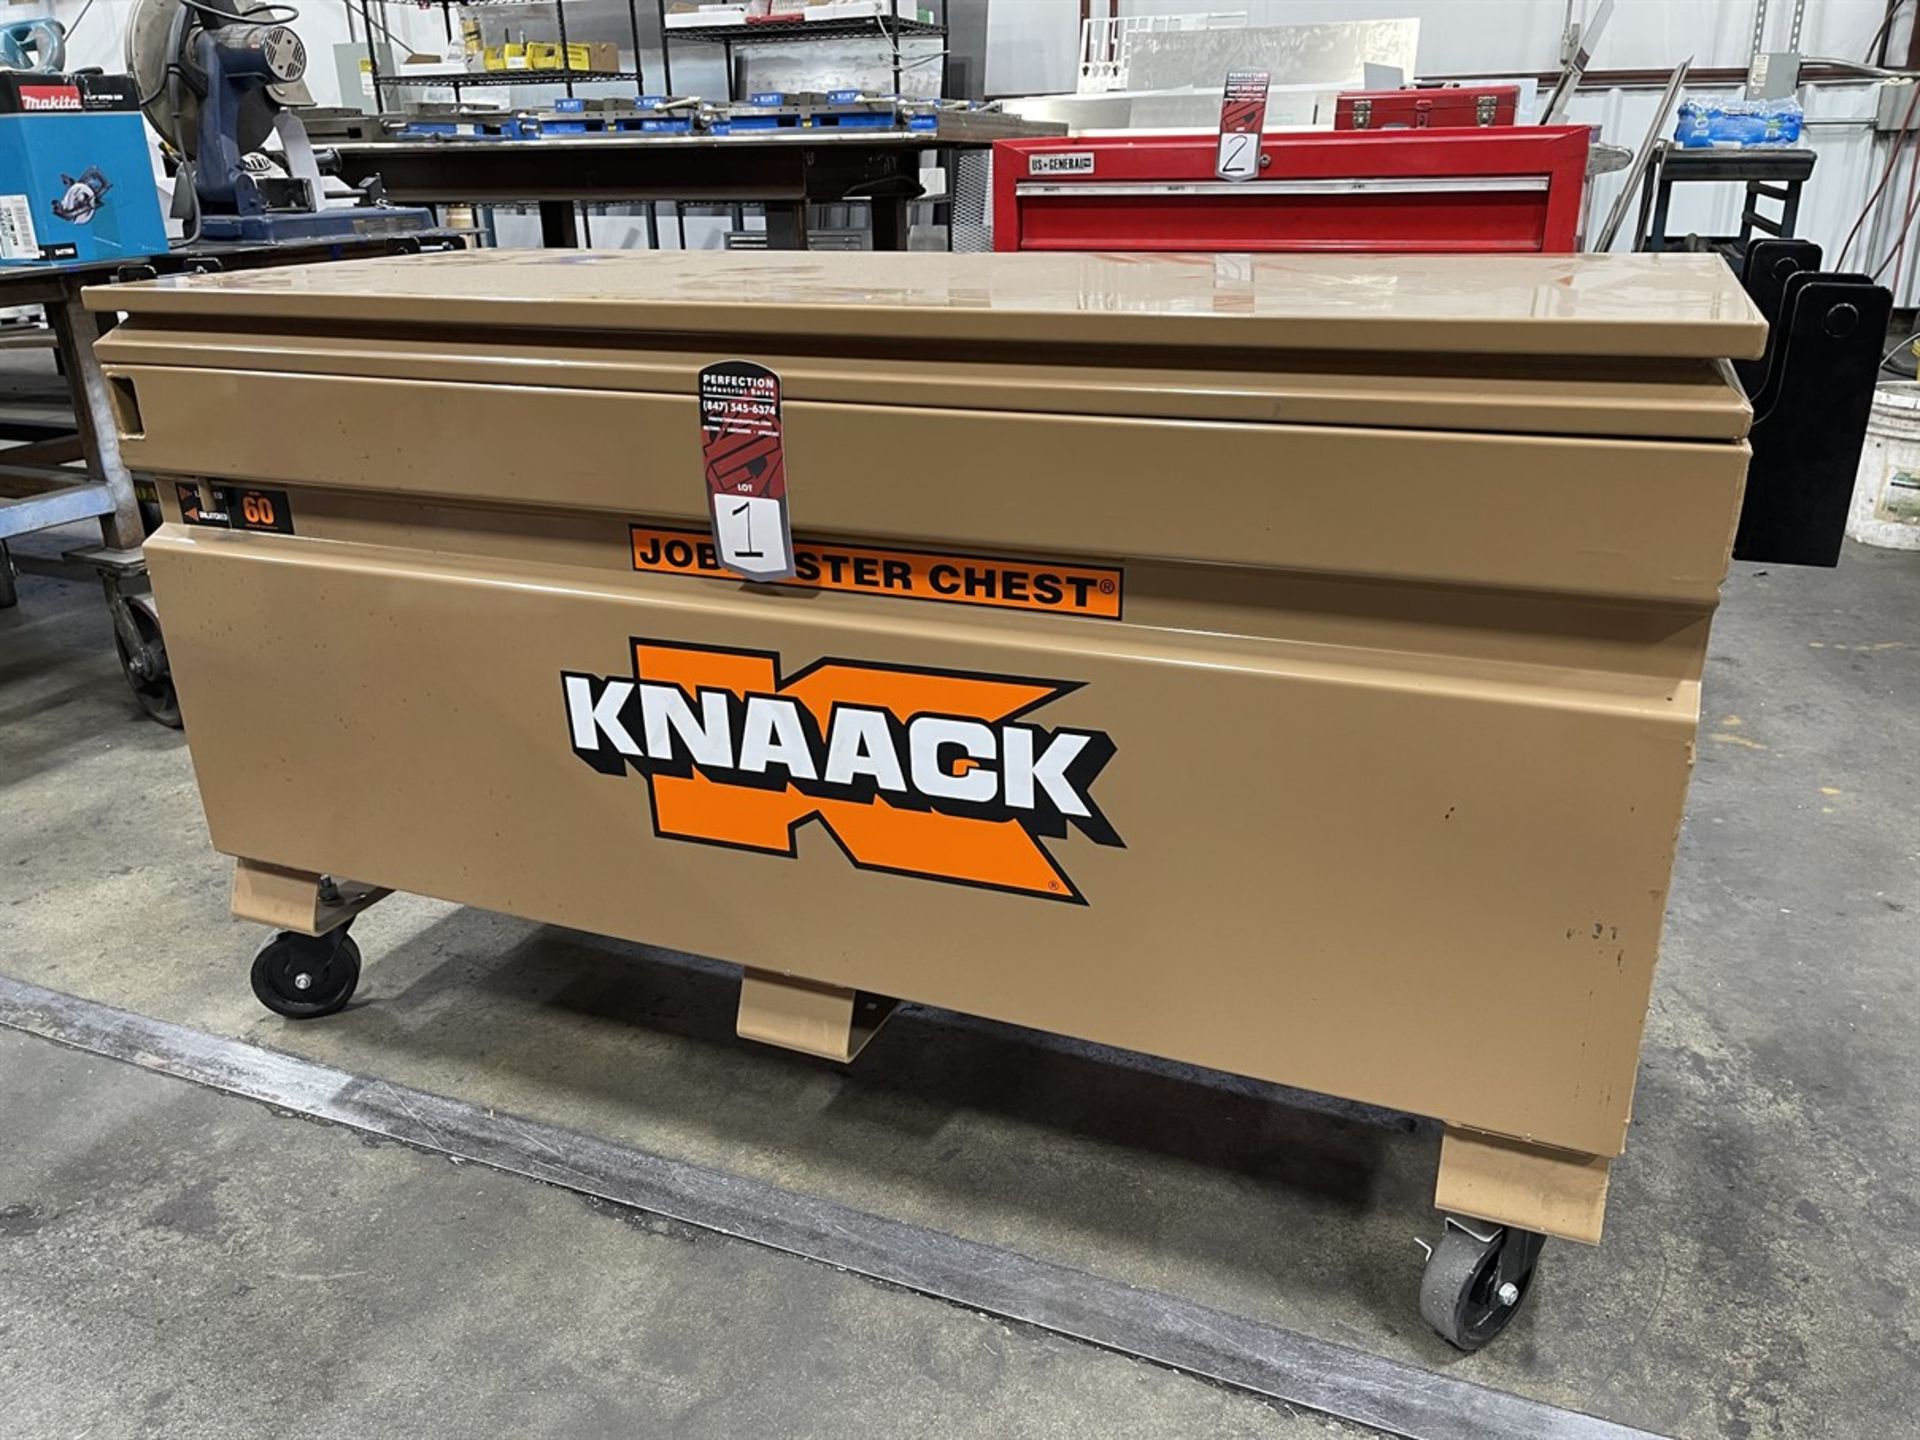 KNAACK 60 Jobmaster Chest (Used to Store Lot #63 HAAS Trunnion Table)